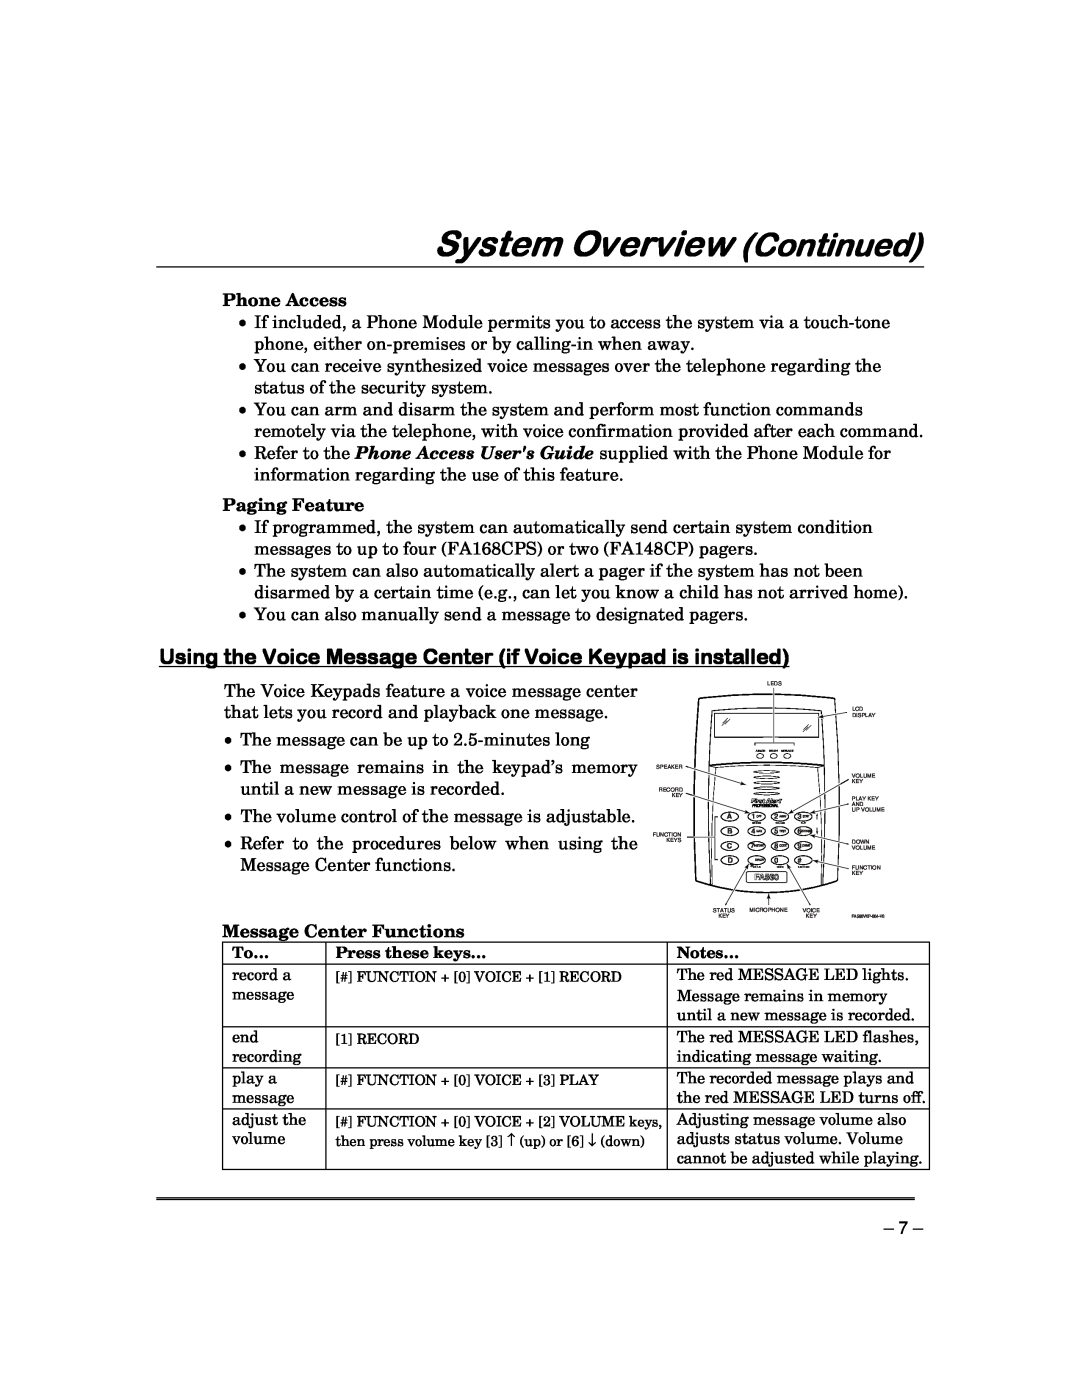 Garmin FA168CPS manual Using the Voice Message Center if Voice Keypad is installed, Stay, System Overview Continued 